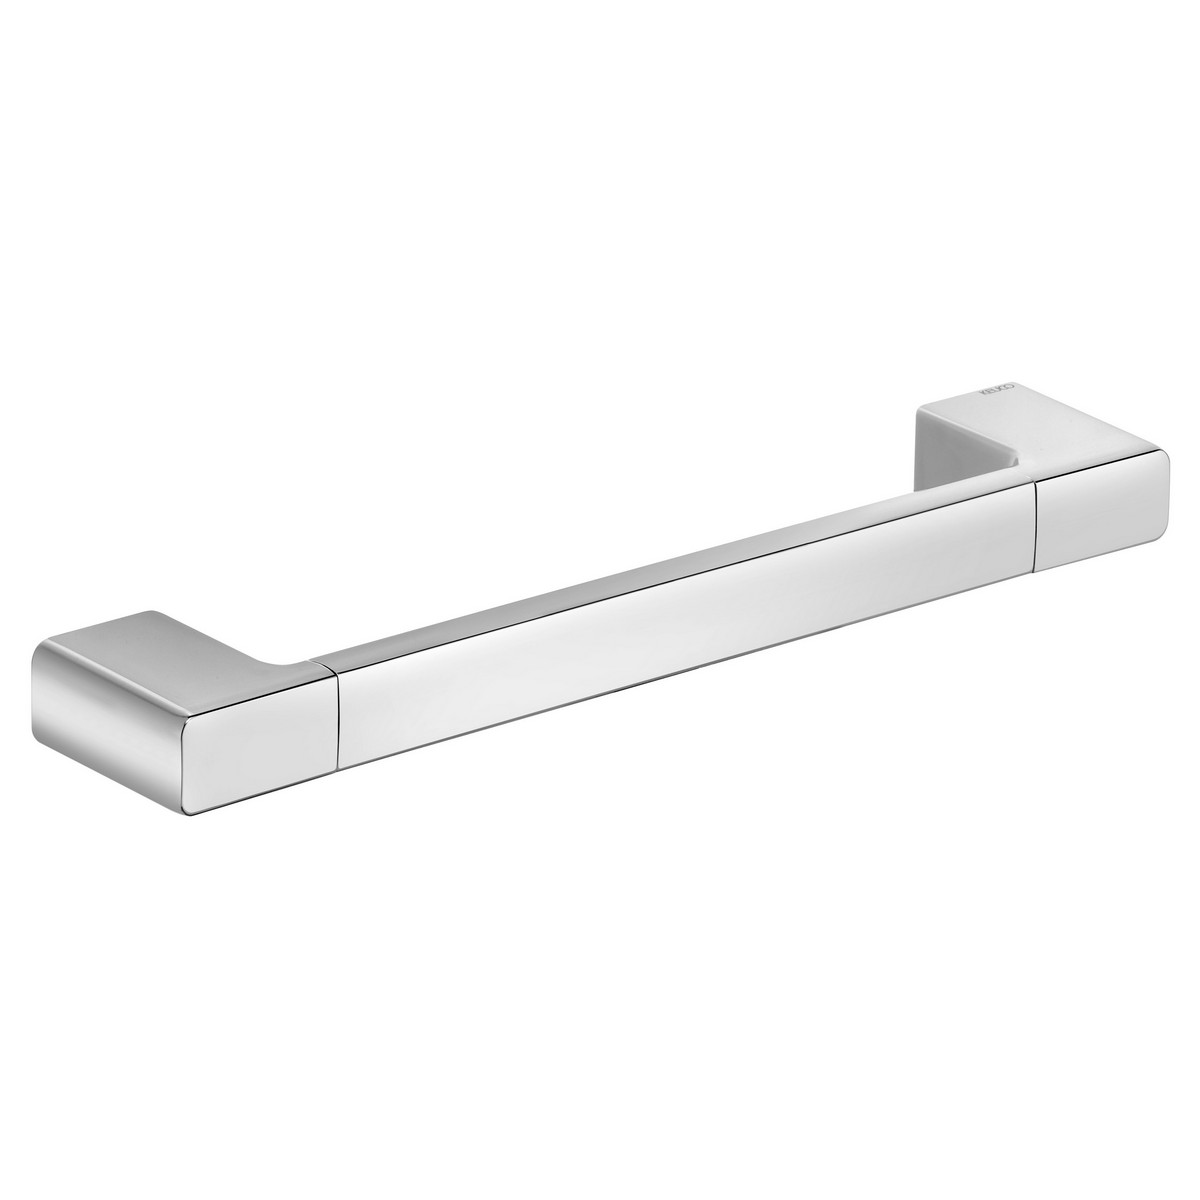 KEUCO 12707010000 MOLL 13 1/2 INCH WALL MOUNTED SUPPORT RAIL IN POLISHED CHROME